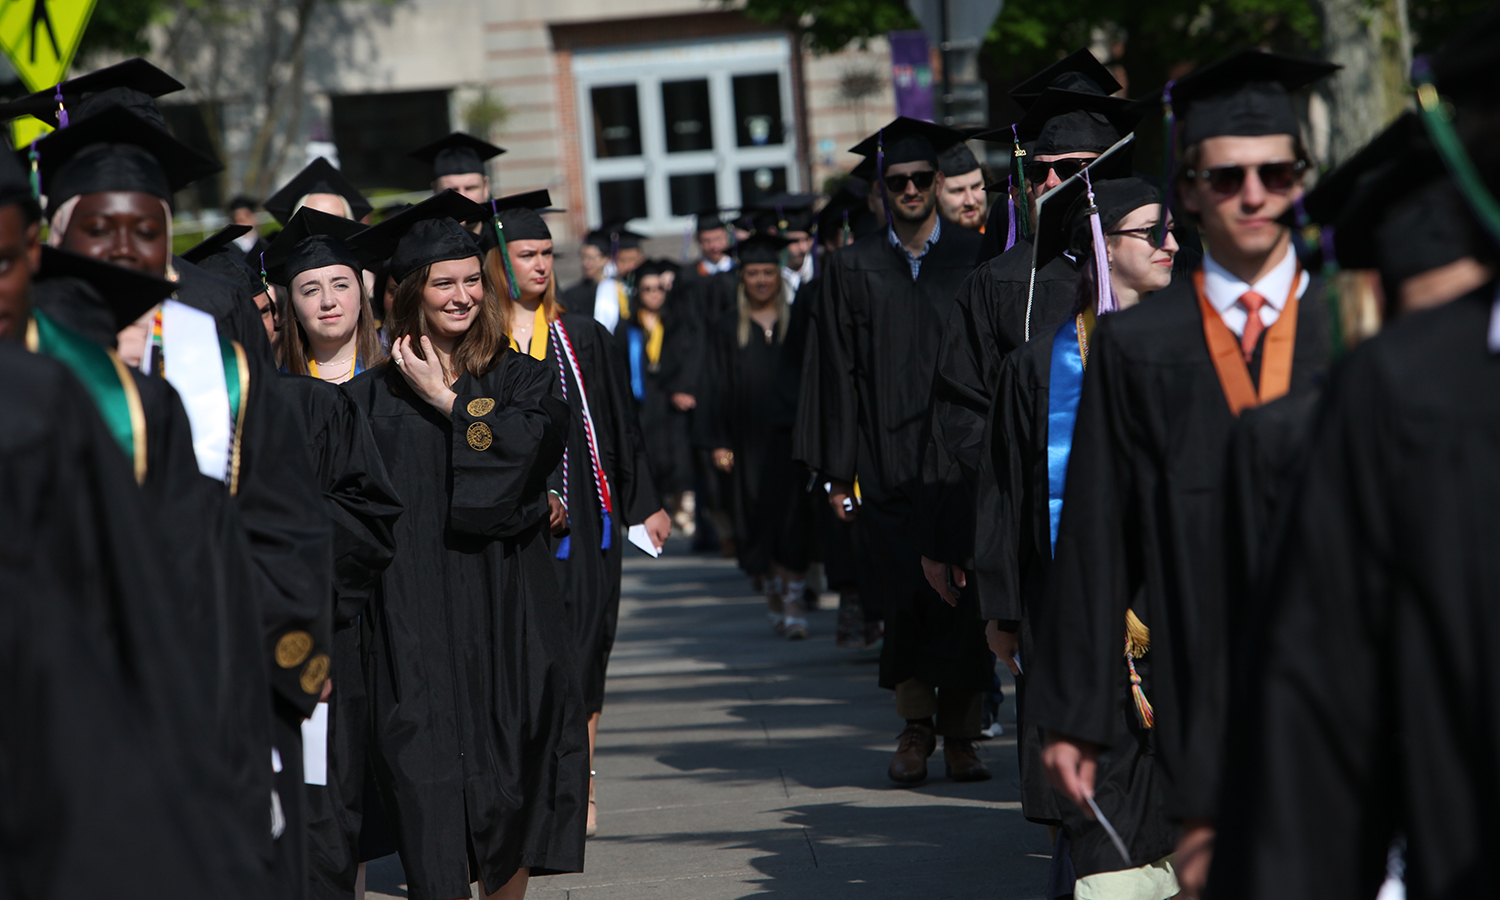 Commencement Gallery